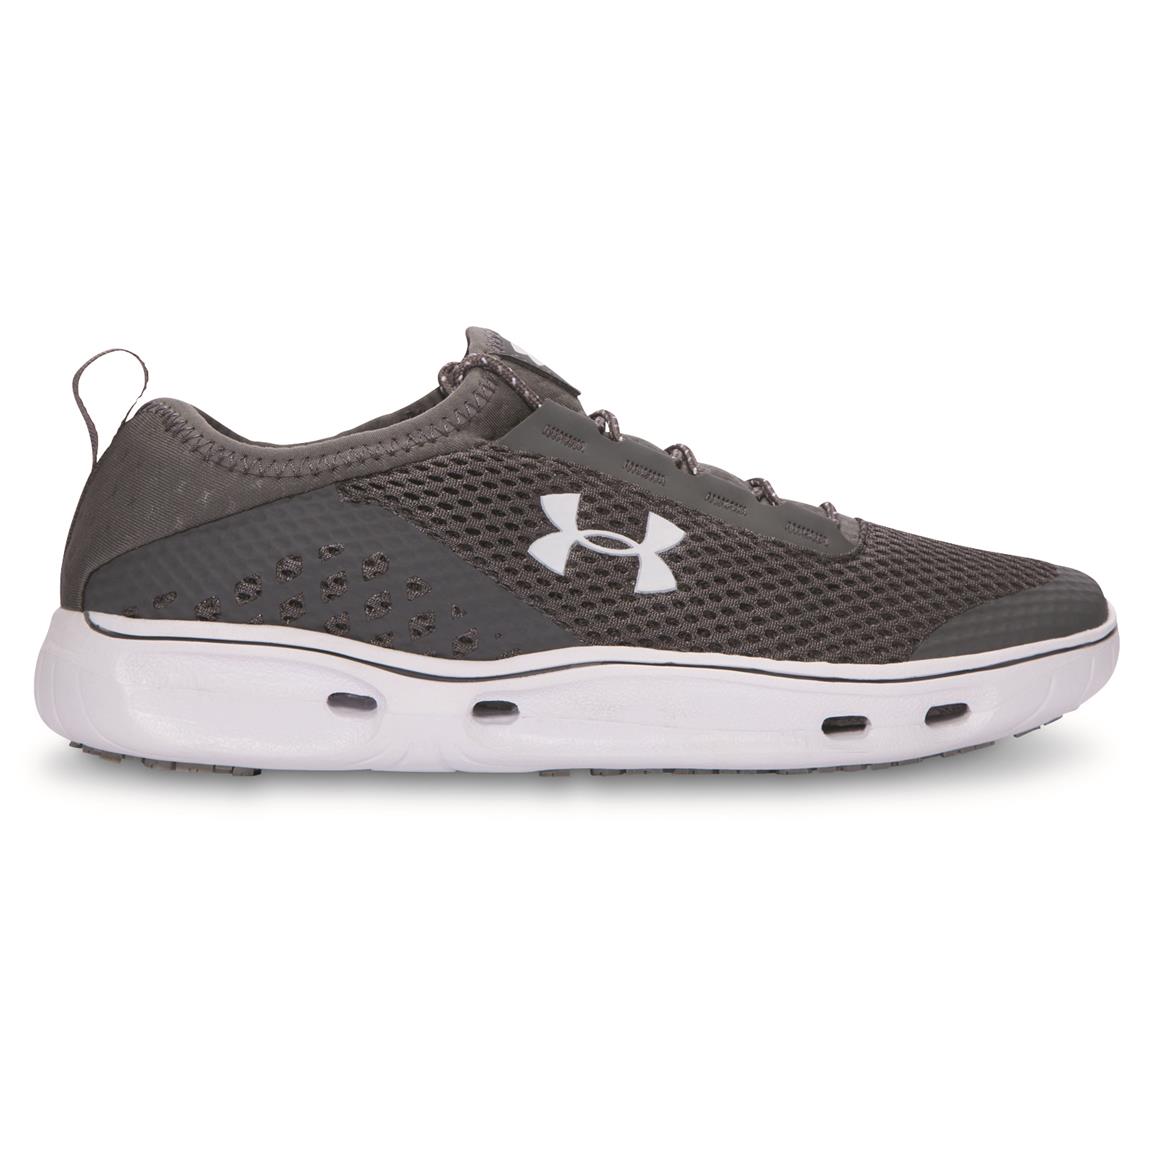 Under Armour Women's Kilchis Water Shoes - 676722, Boat & Water Shoes ...